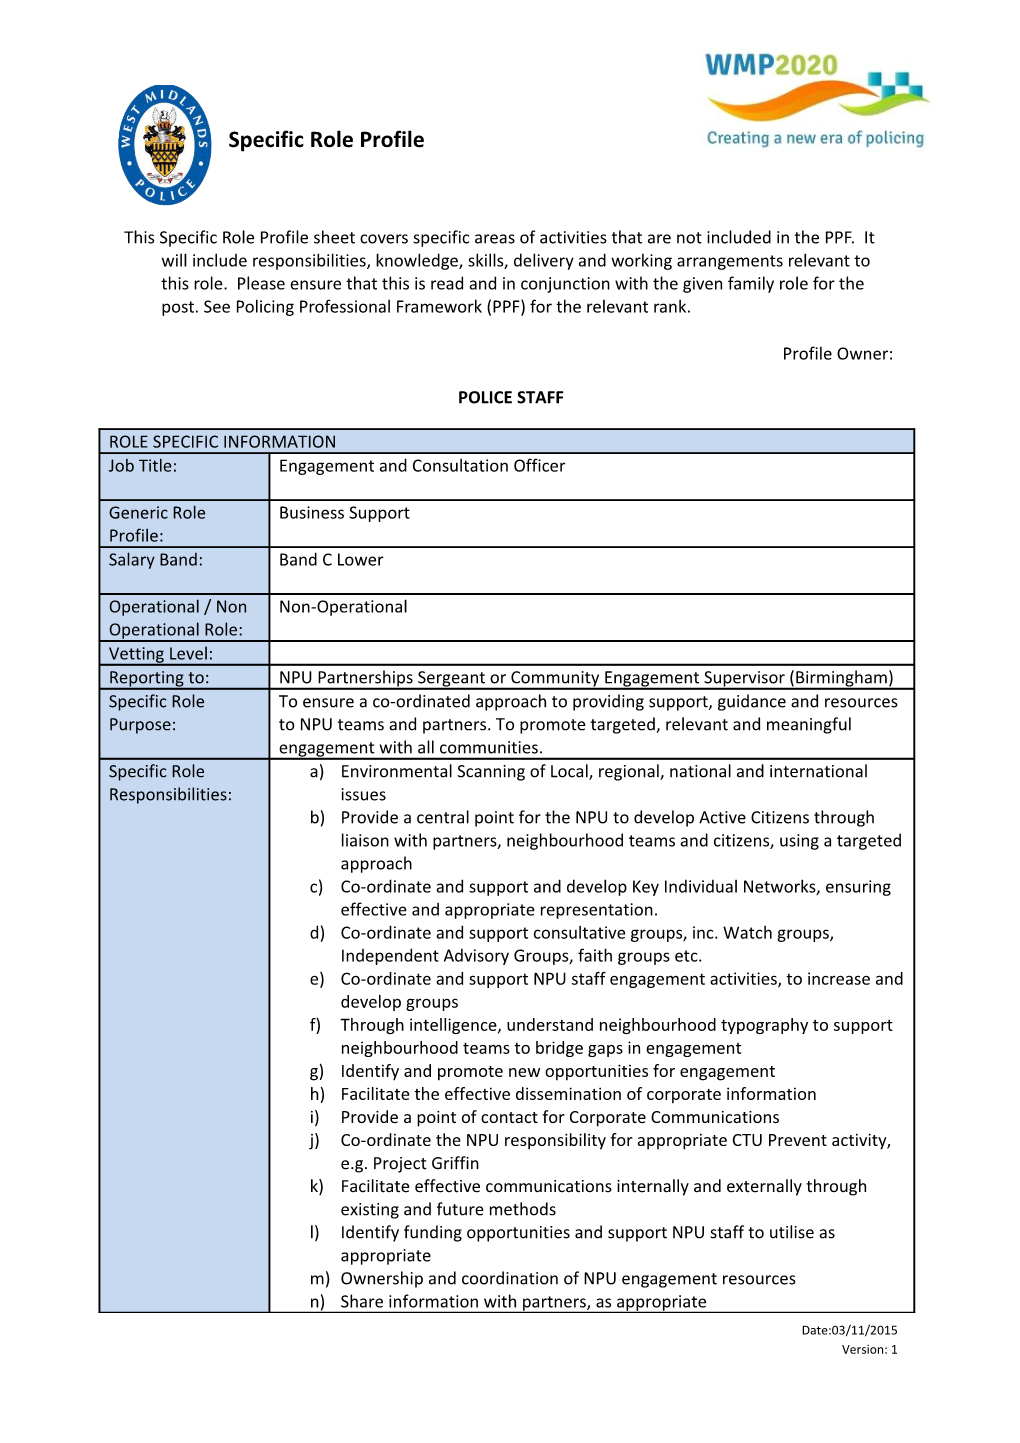 This Specific Role Profile Sheet Covers Specific Areas of Activities That Are Not Included